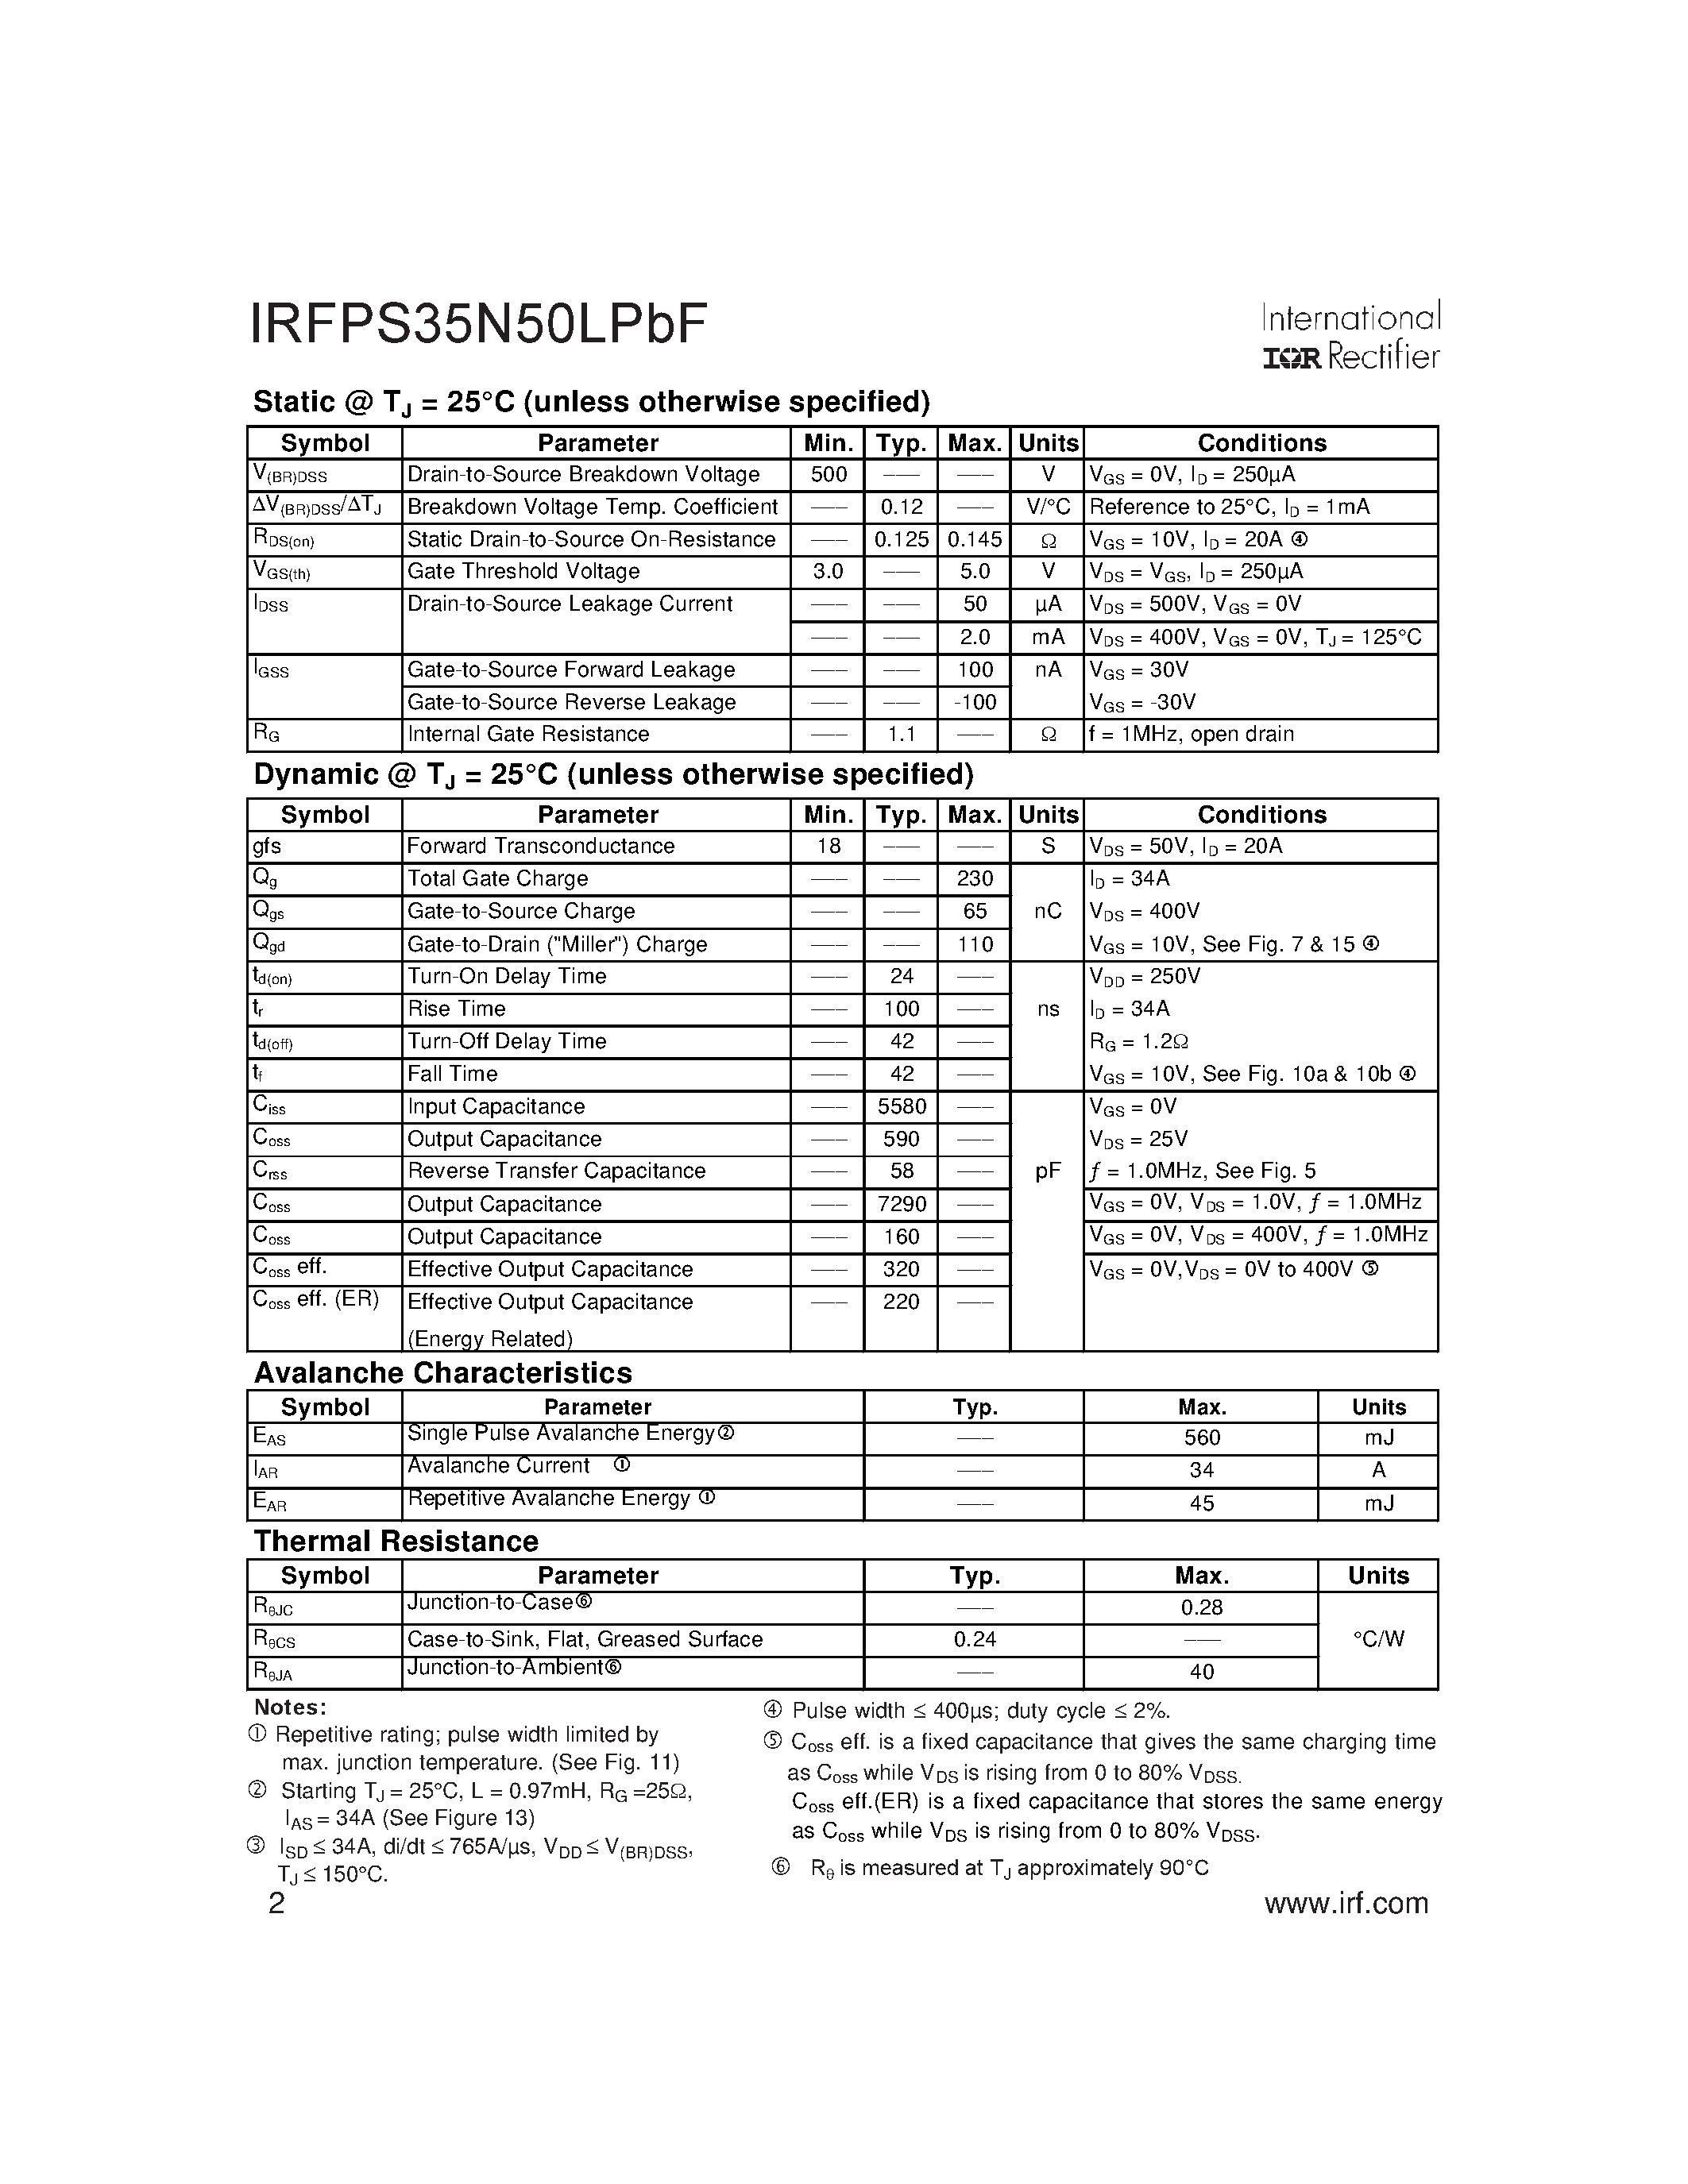 Datasheet IRFPS35N50LPBF - SMPS MOSFET page 2